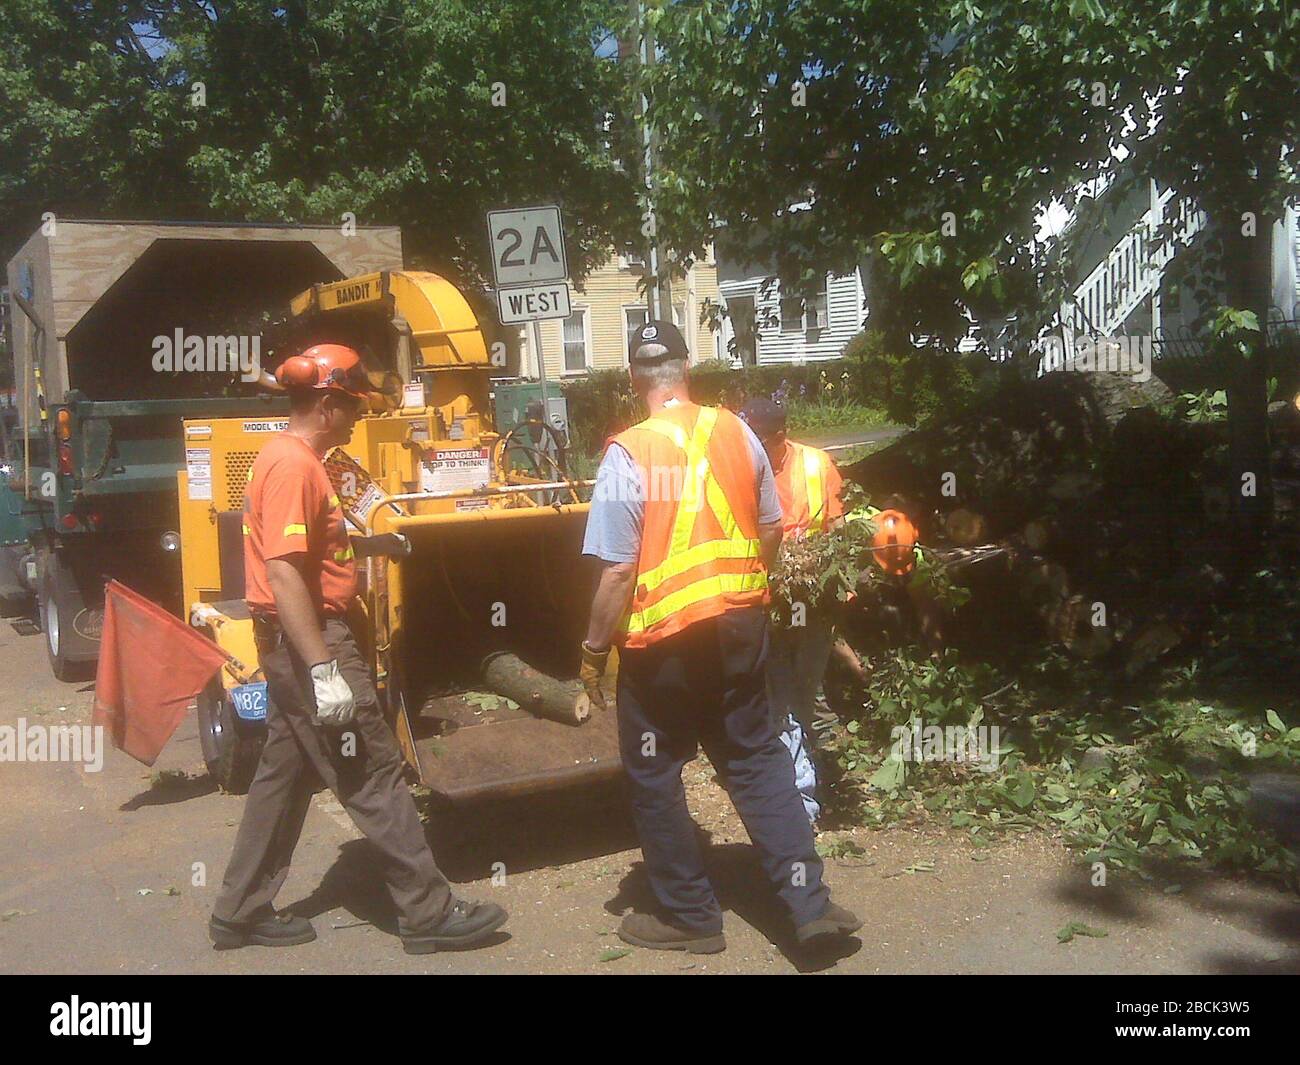 'MassDOT crews are helping state Emergency Management with clean up following this week's severe storm that downed trees and blocked streets and roads in Greenfield and Franklin County.  MassDOT provided five crews equipped with chain saws, wood chippers and dump trucks to assist on state roadway cleanup in the area.  Two MBTA tree crews were also dispatched at the request of Emergency Management officials.; 28 May 2010, 11:19; MassDOT Franklin County Storm Cleanup, May 28, 2010; MassDOT; ' Stock Photo